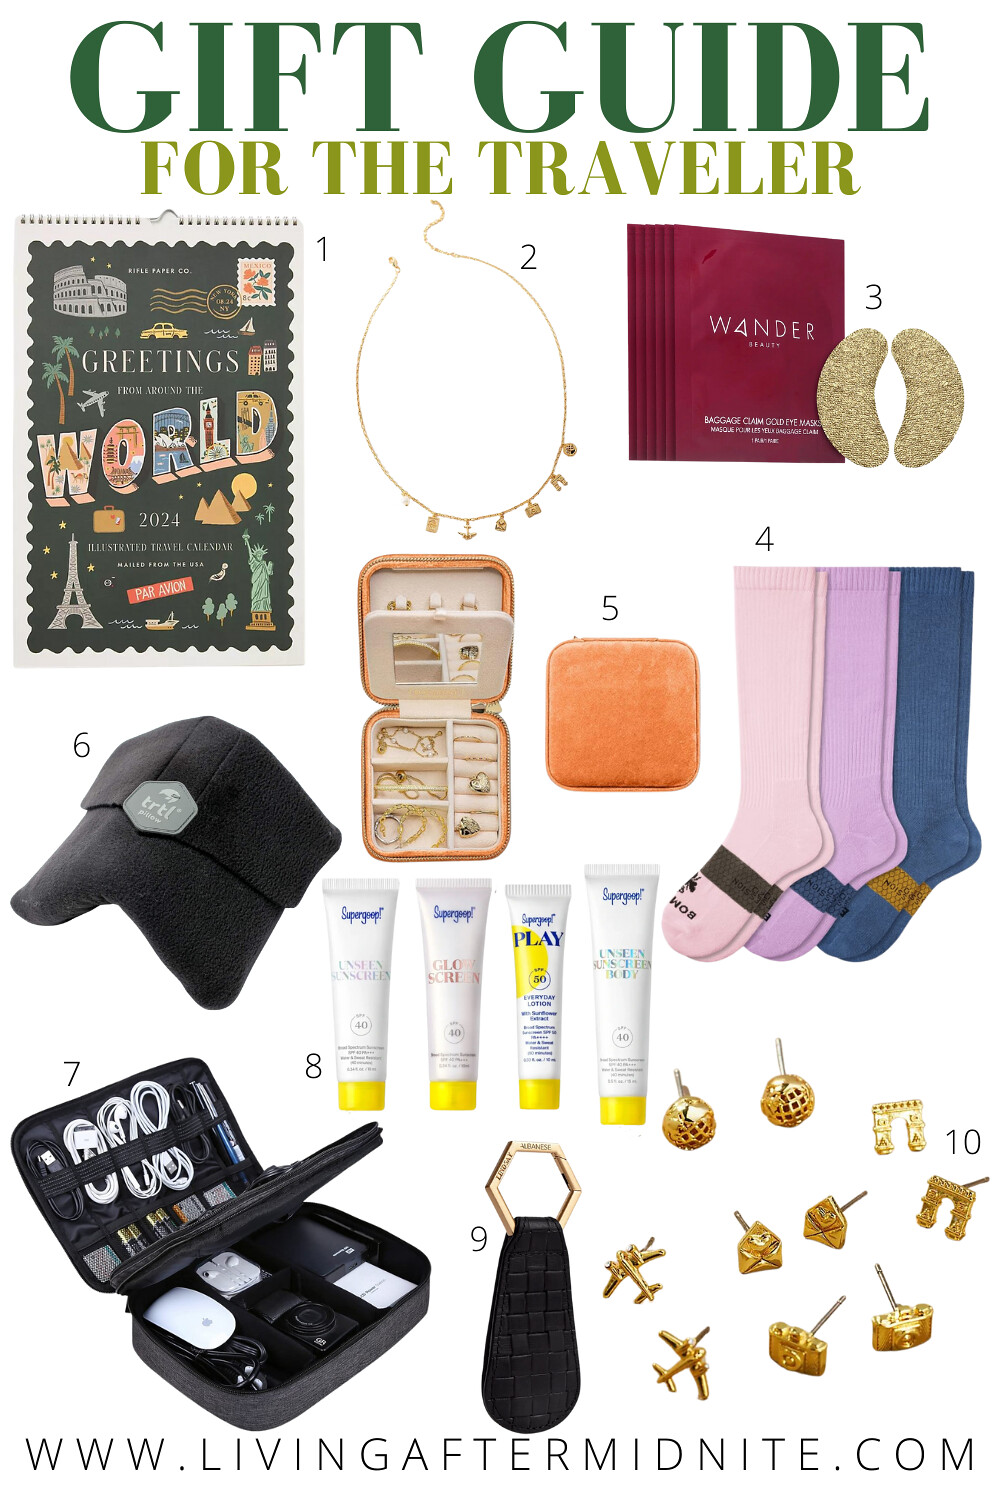 Gift Guide for the Traveler | Wife Gift Ideas | Girlfriend Gift Ideas | Ultimate Holiday Gift Guide | Christmas Presents | Boyfriend Gift Ideas